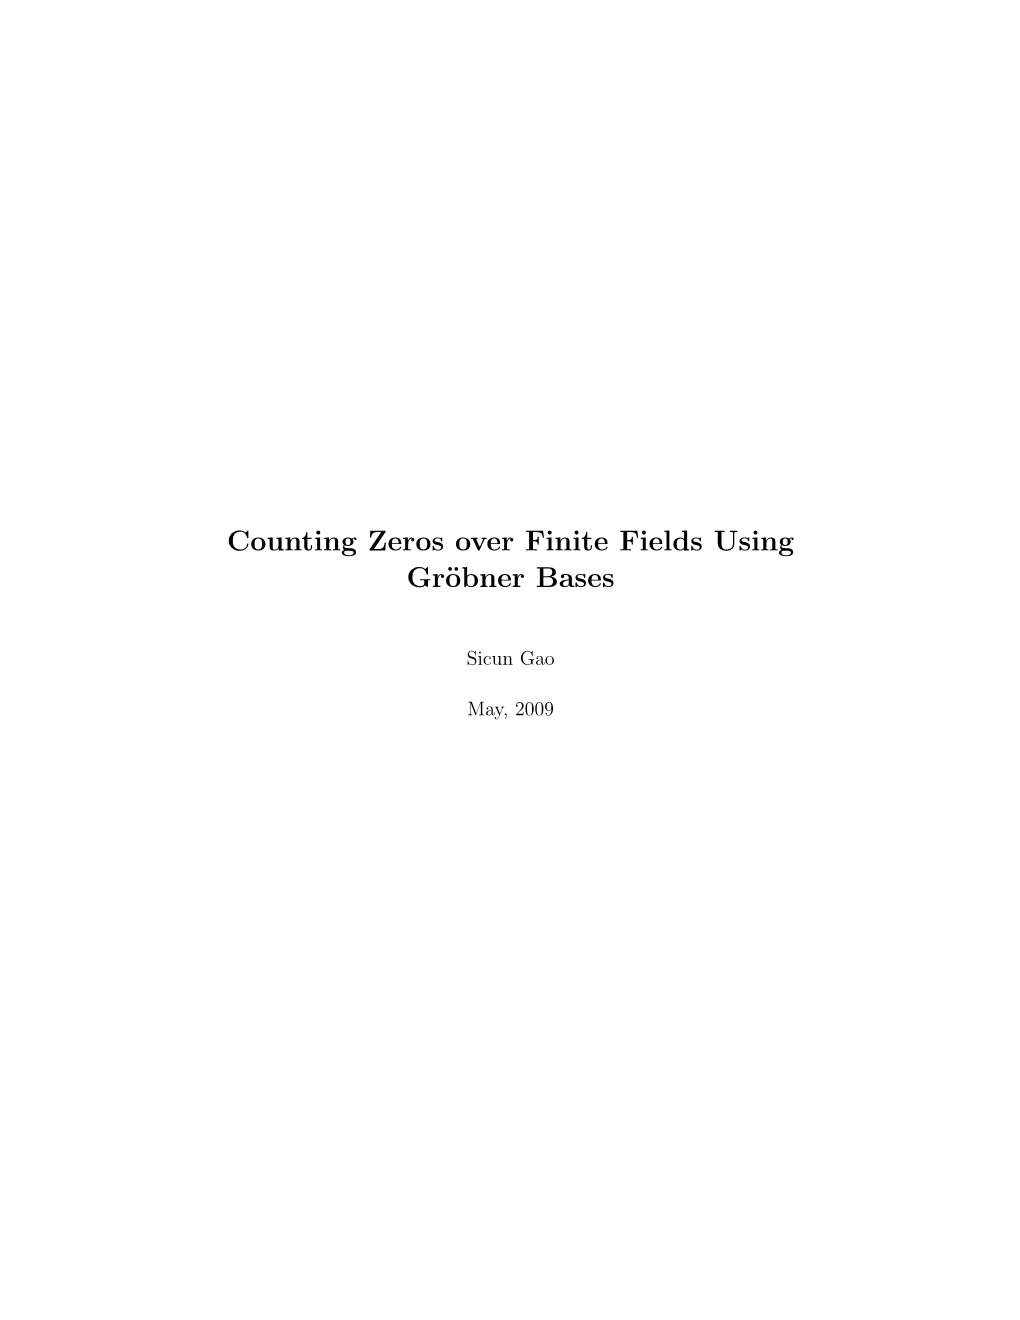 Counting Zeros Over Finite Fields Using Gröbner Bases